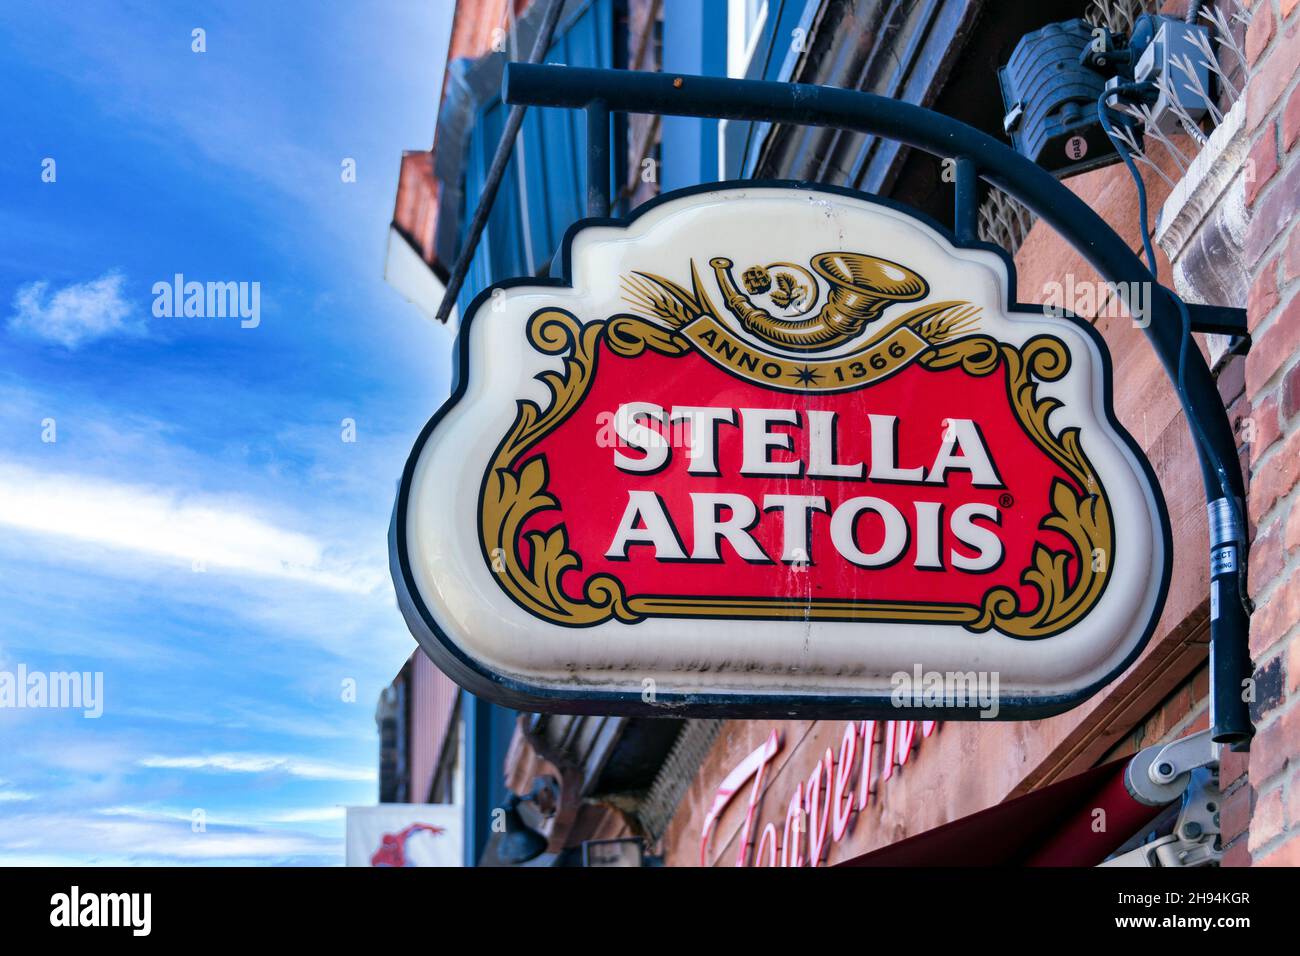 Advertising sign of Stella Artois beer on a business entrance wall. Nov. 22, 2021 Stock Photo